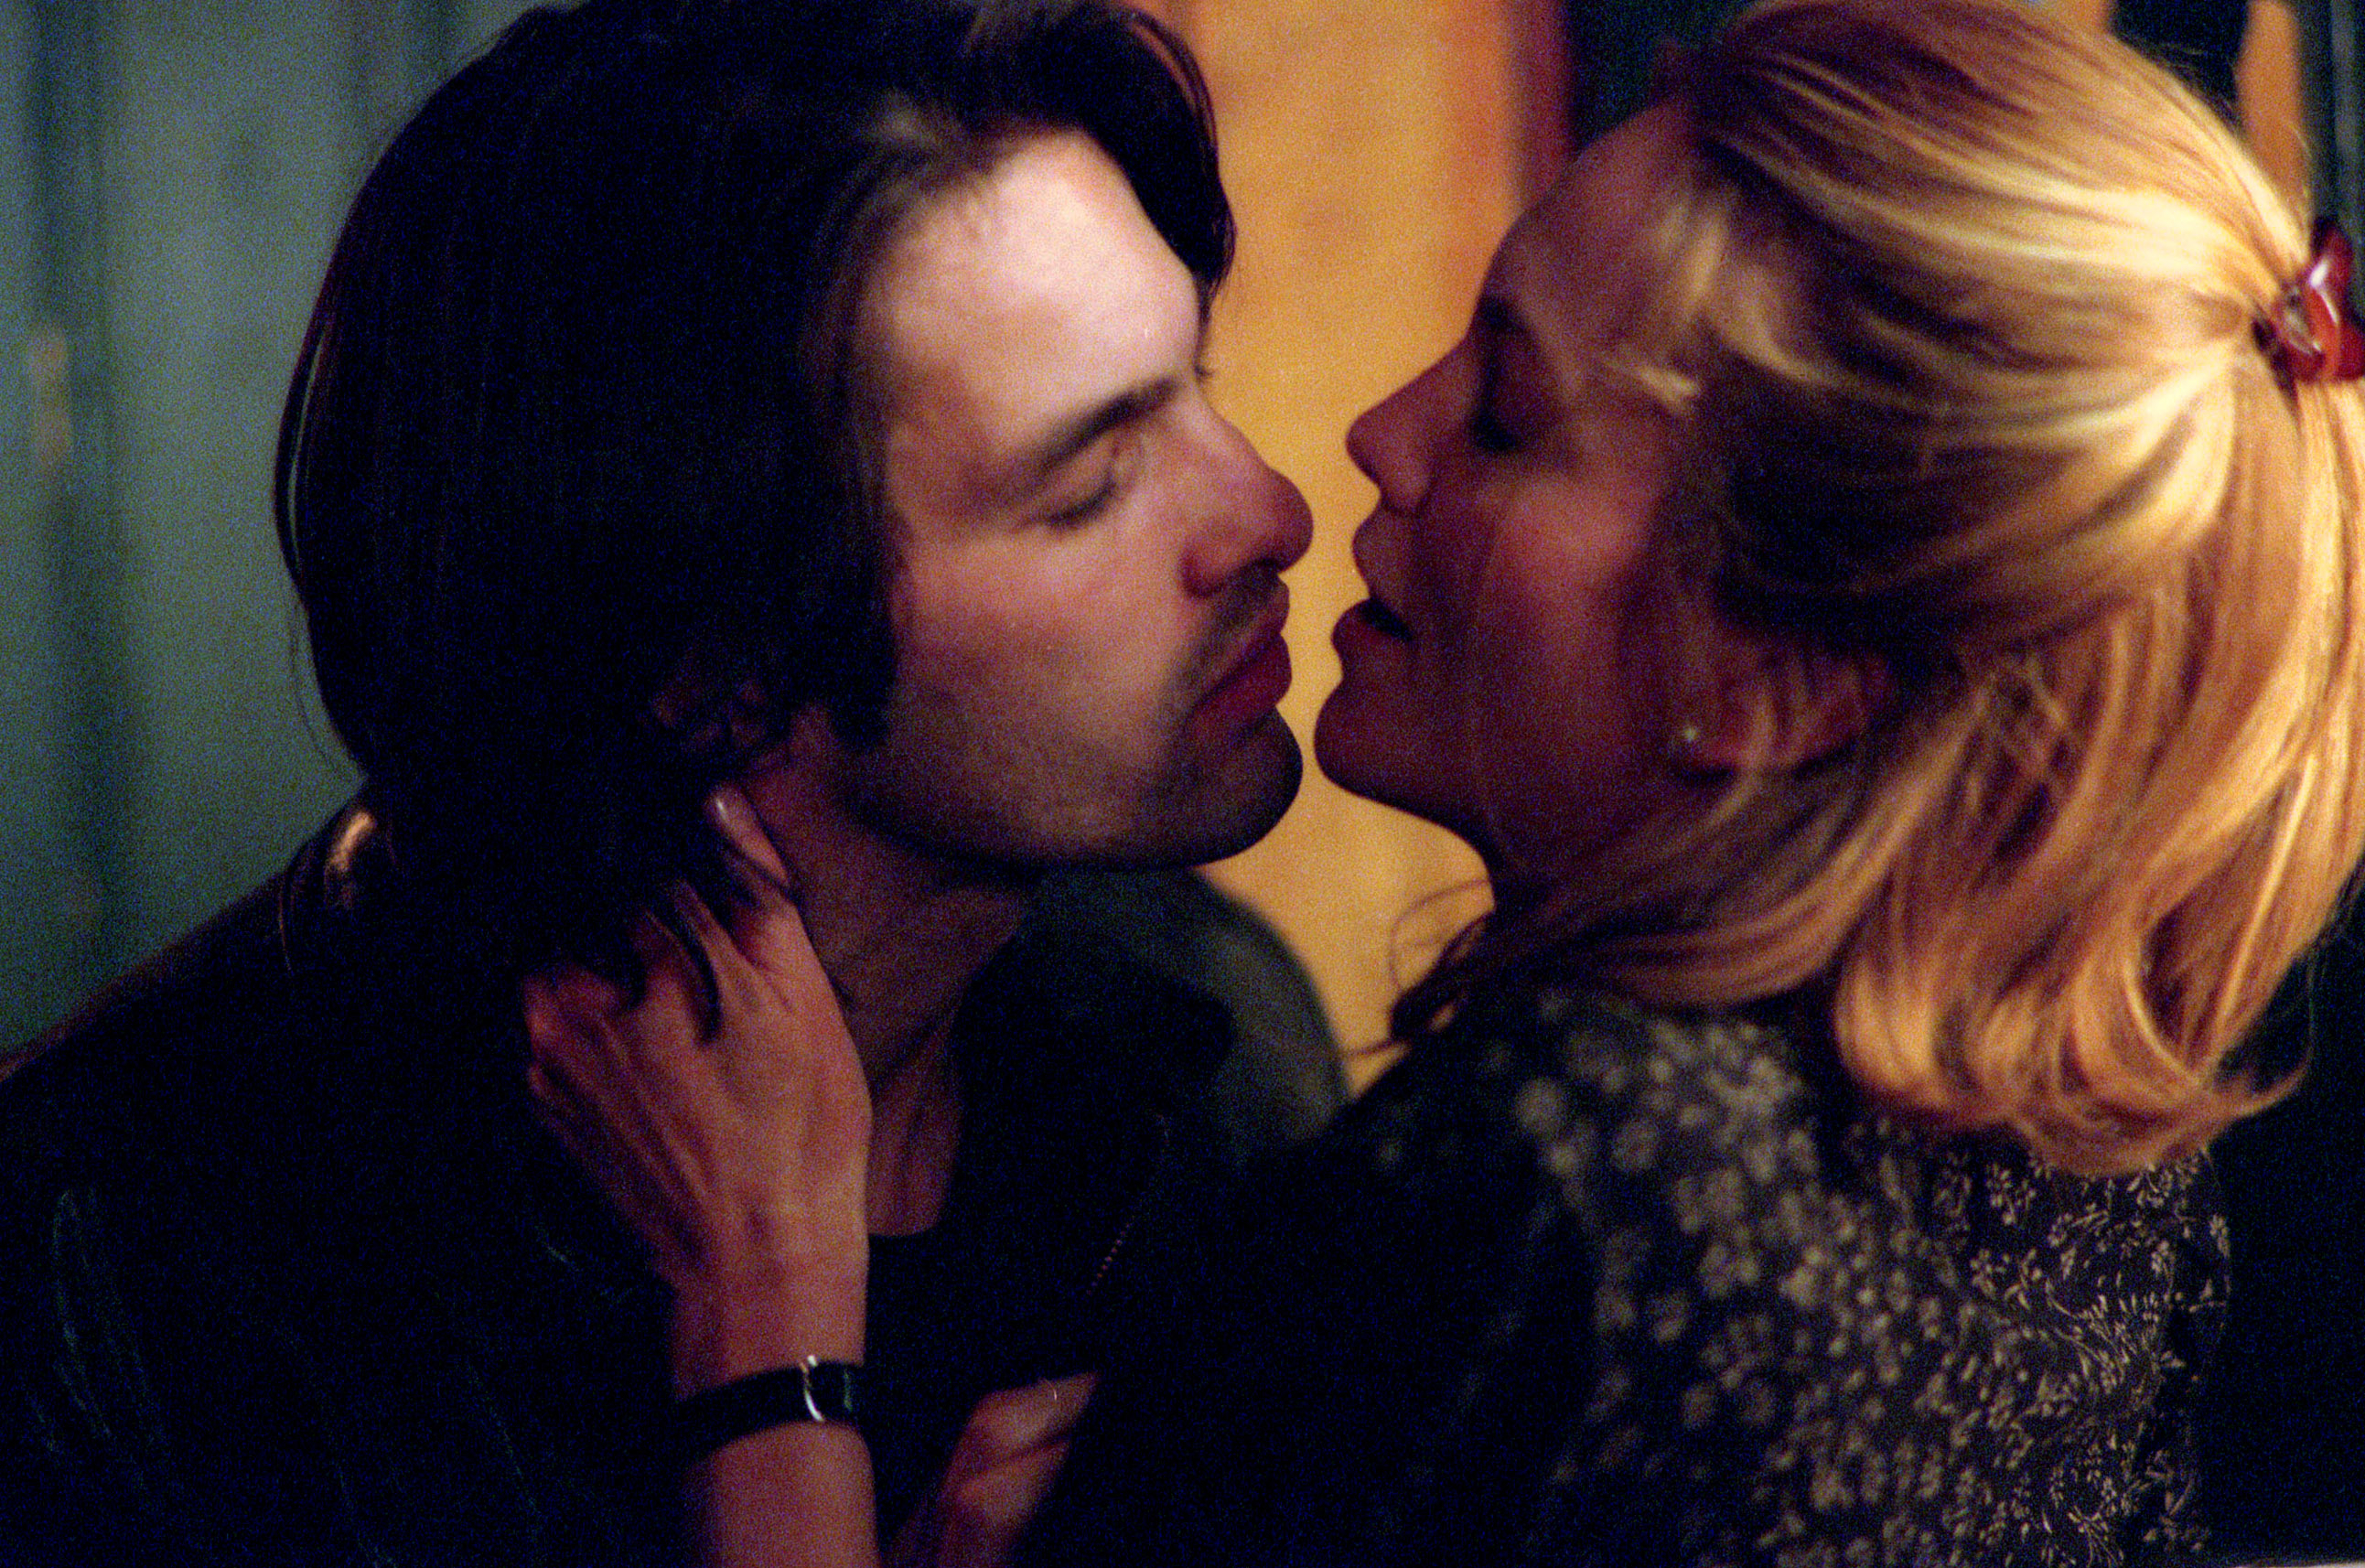 Olivier Martinez, Diane Lane embracing each other in an intimate close-up scene